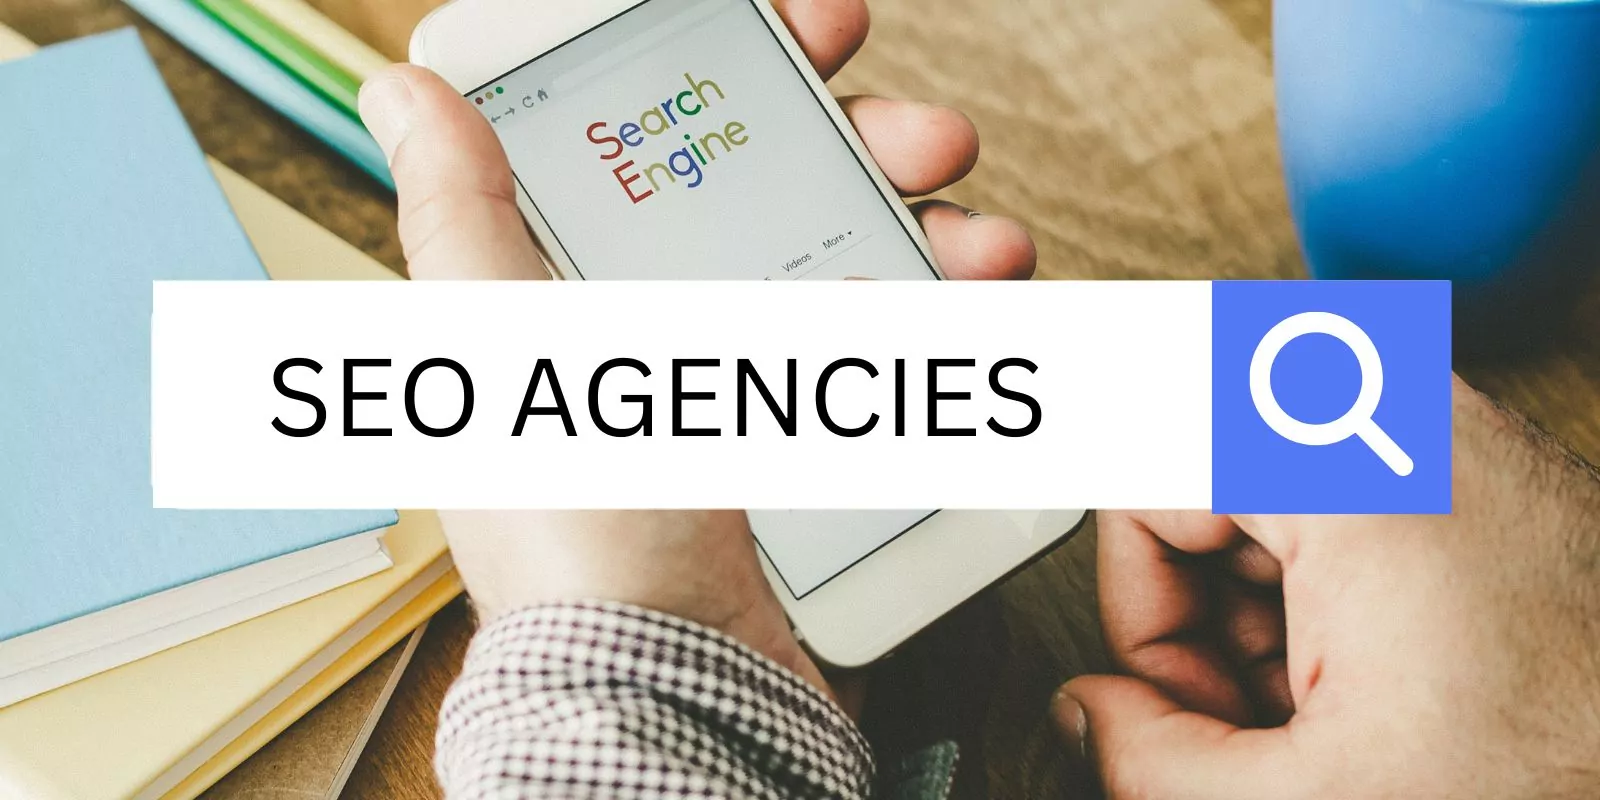 Researching Potential SEO Agencies